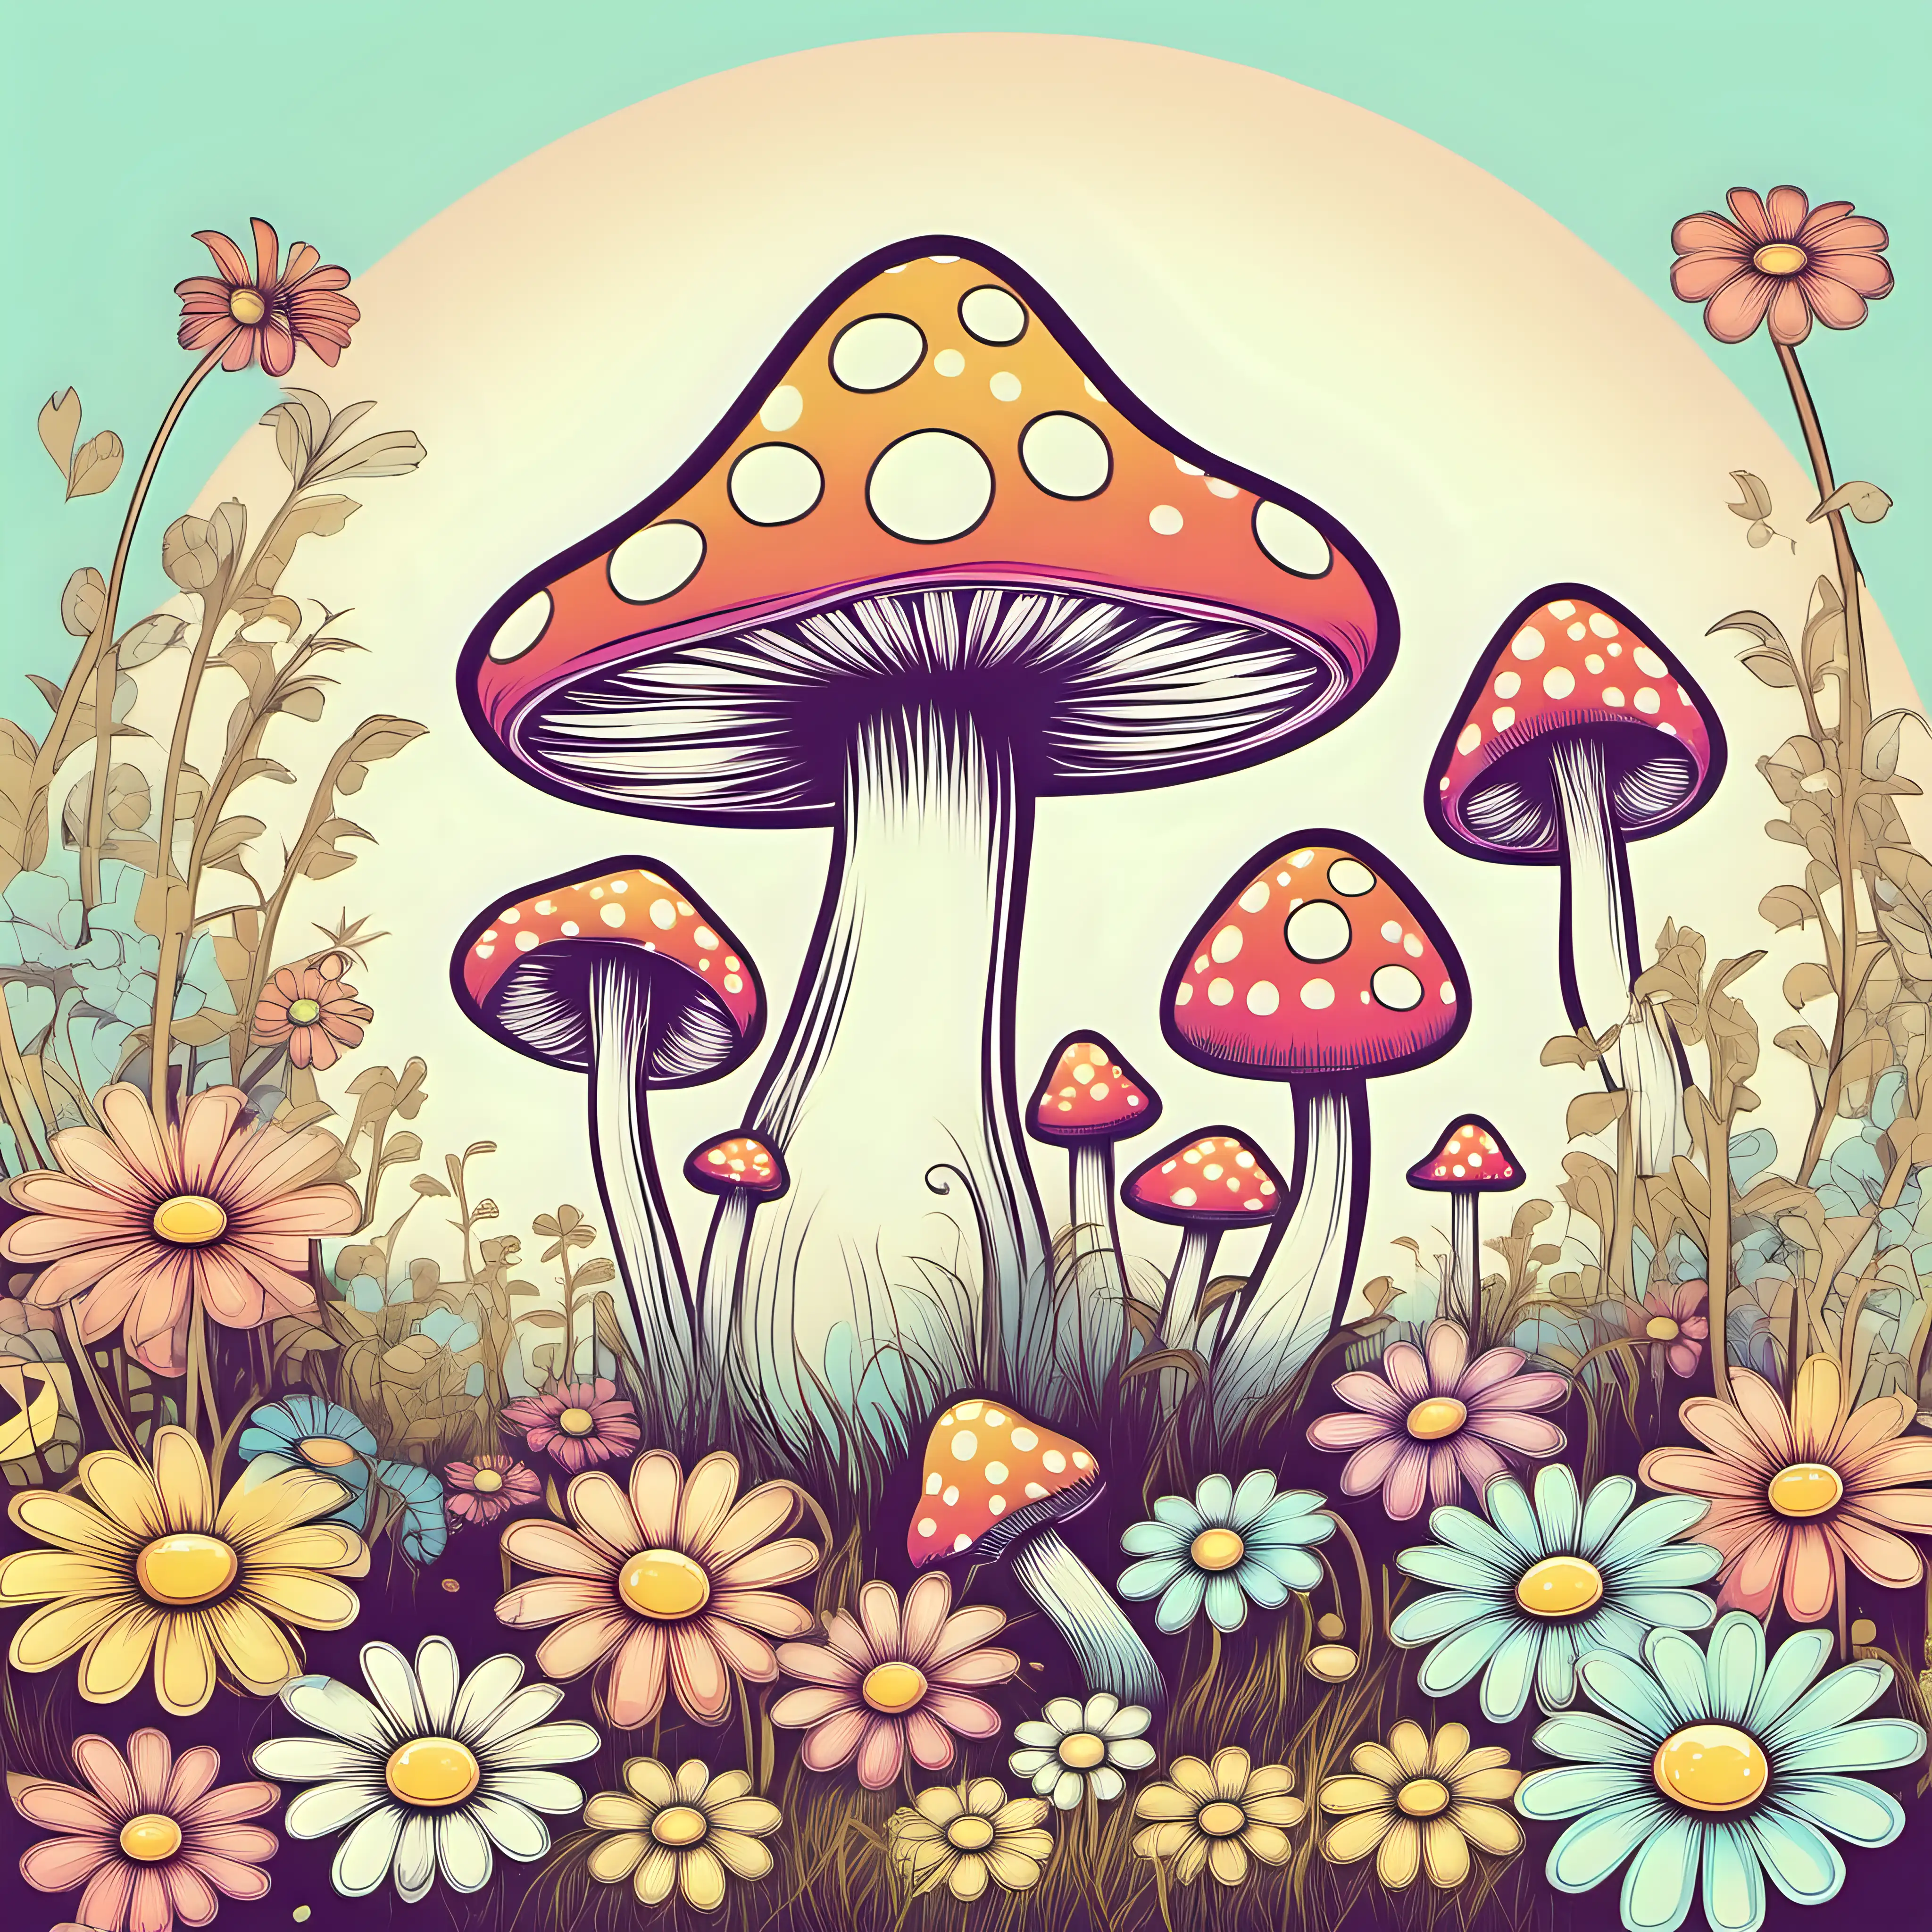 Whimsical, psychedelic,Cartoon mushroom, pastel, retro colors, daisies, vintage, white background 